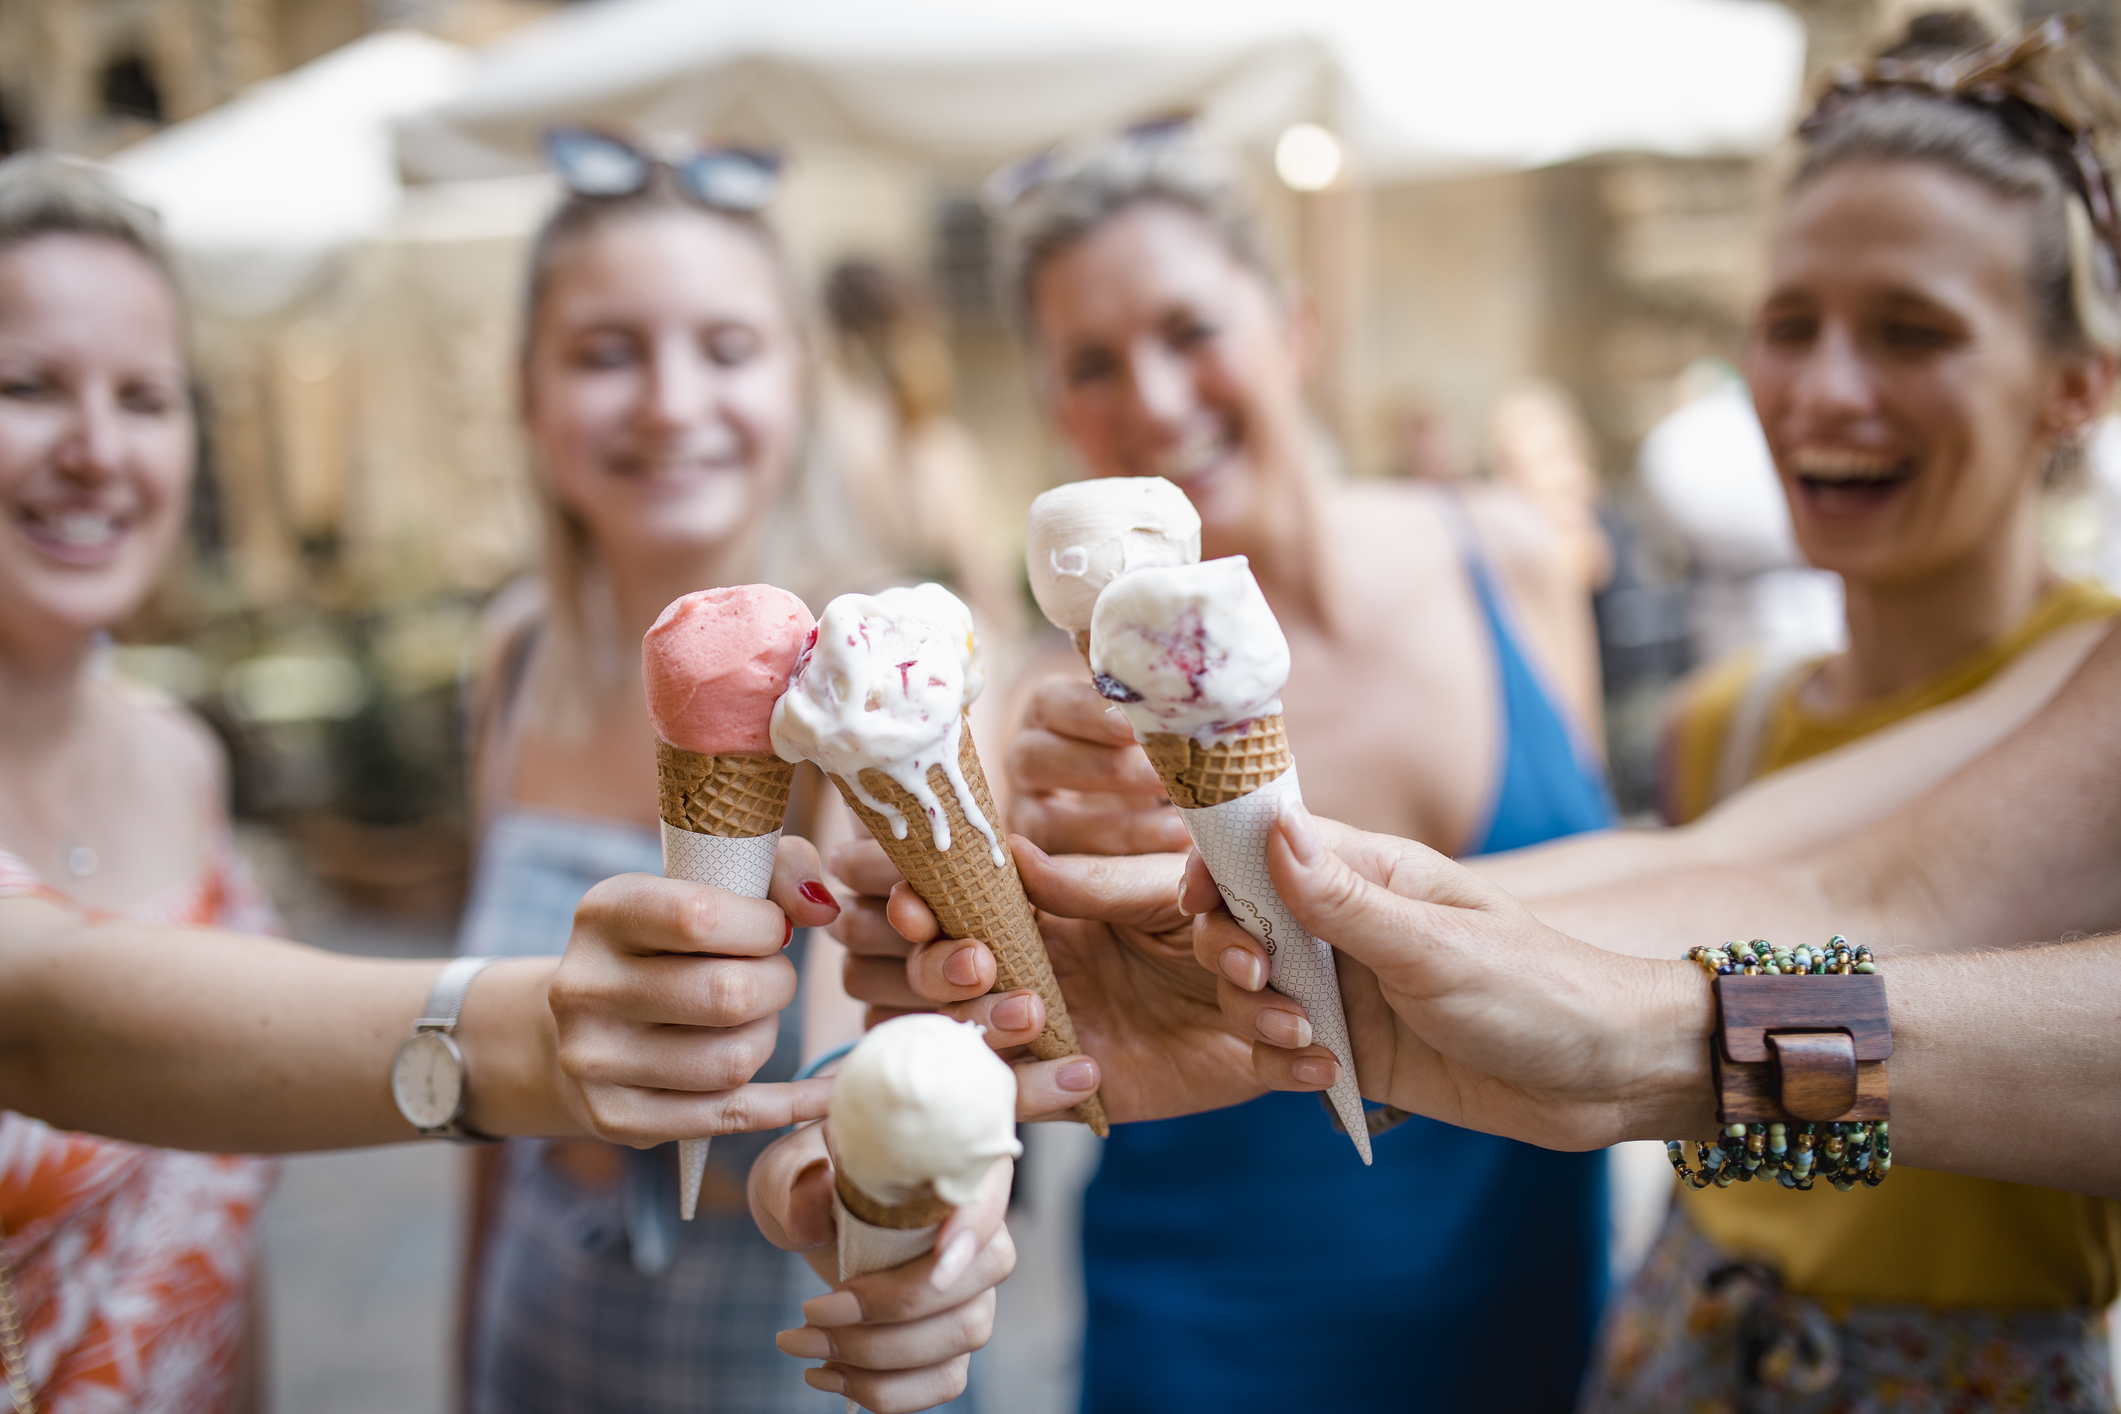 A small group of women enjoy ice cream in Volterra, Italy.